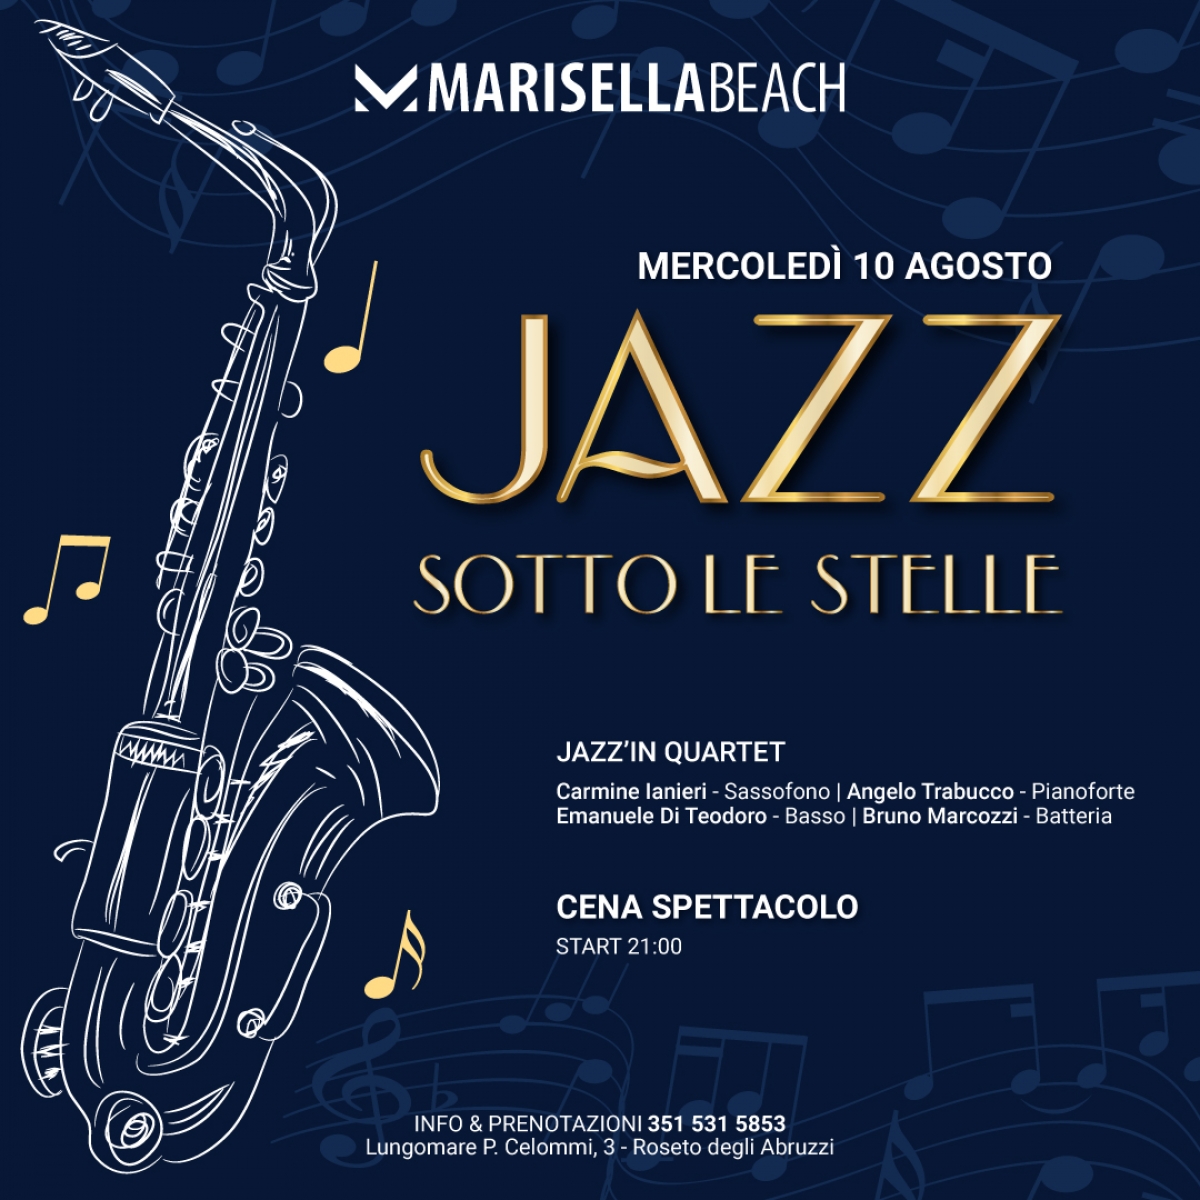 Jazz sotto le stelle